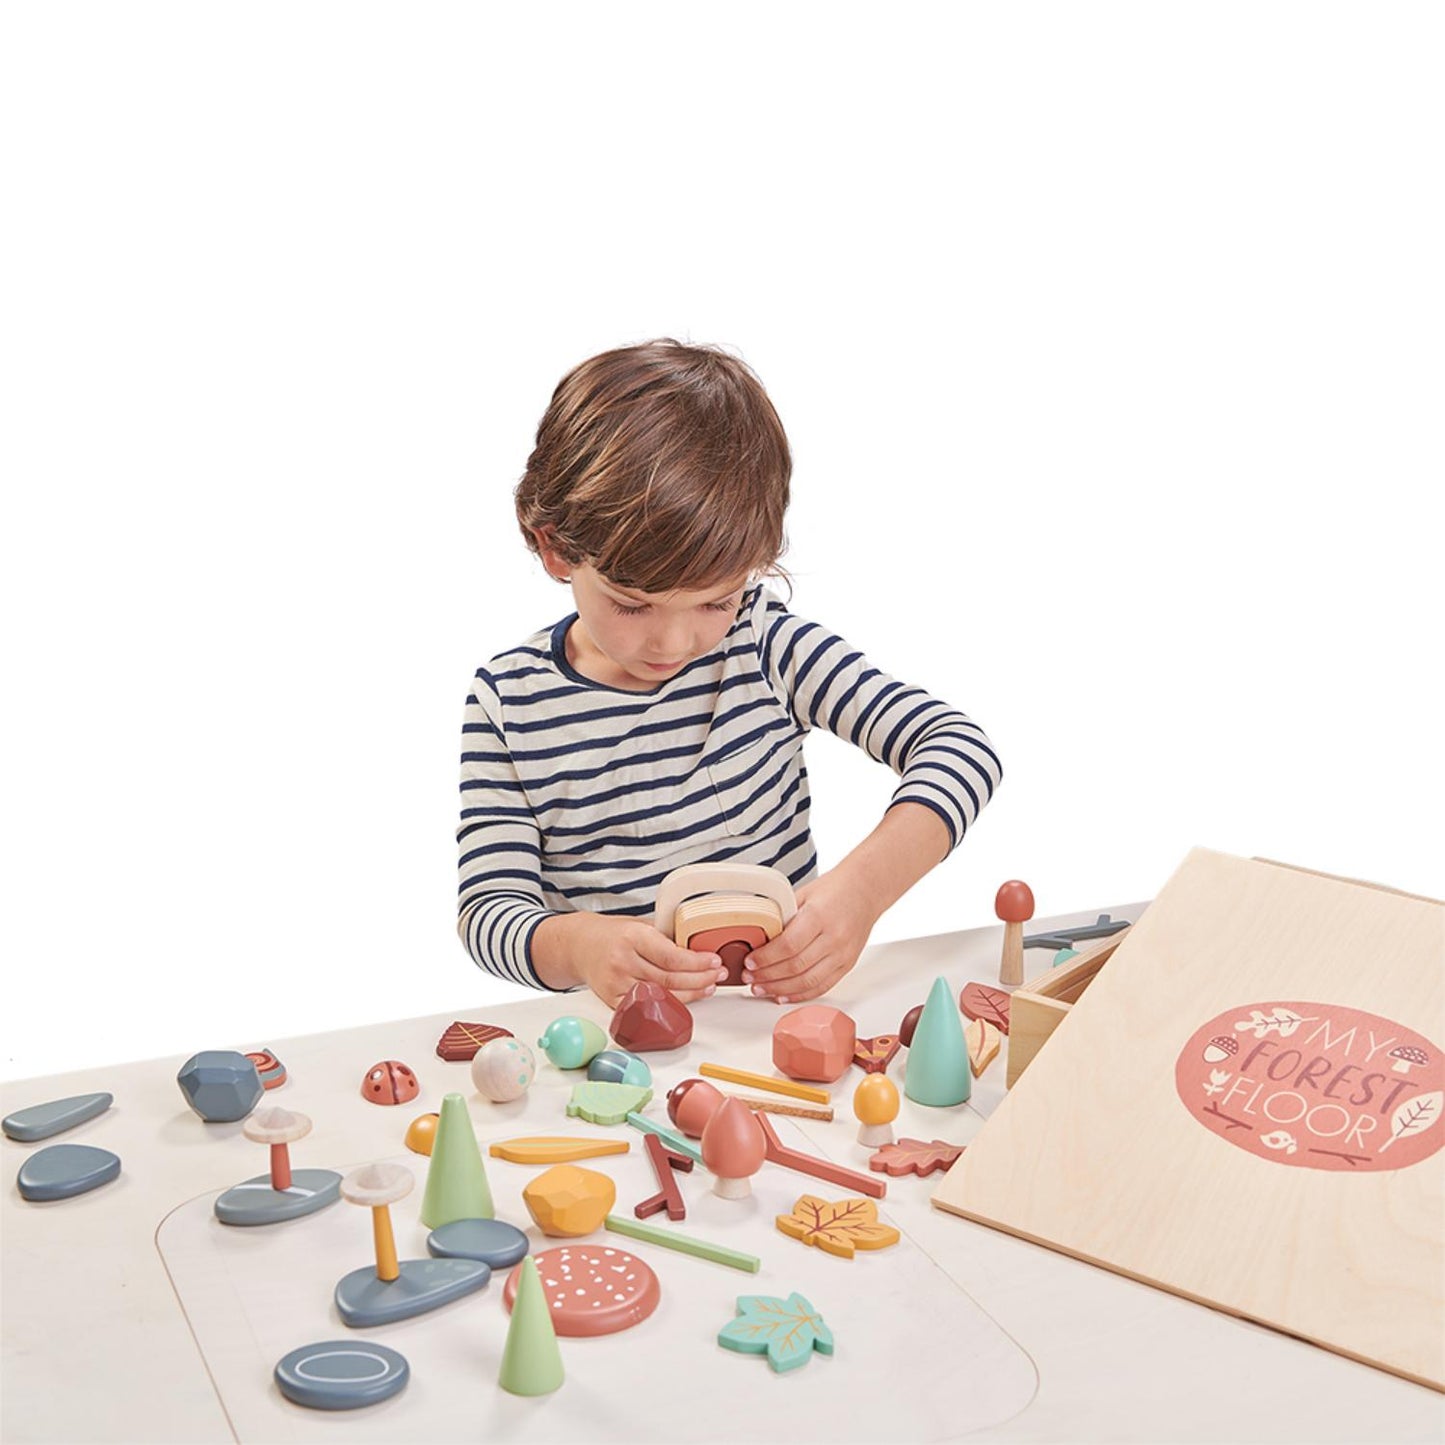 My Forest Floor | Open-Ended Play Wooden Toy Set For Kids | Lifestyle: Boy Playing With Wooden Pieces On A Table | BeoVERDE.ie